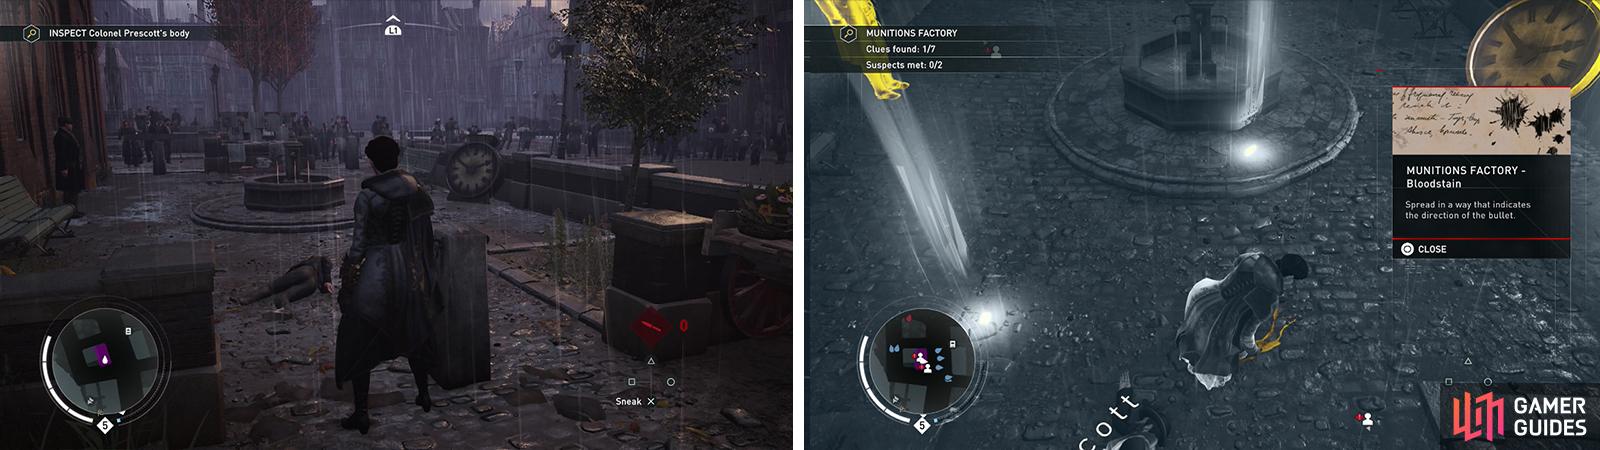 Investigate the body (left) and then investigate the clues in the search area (right).